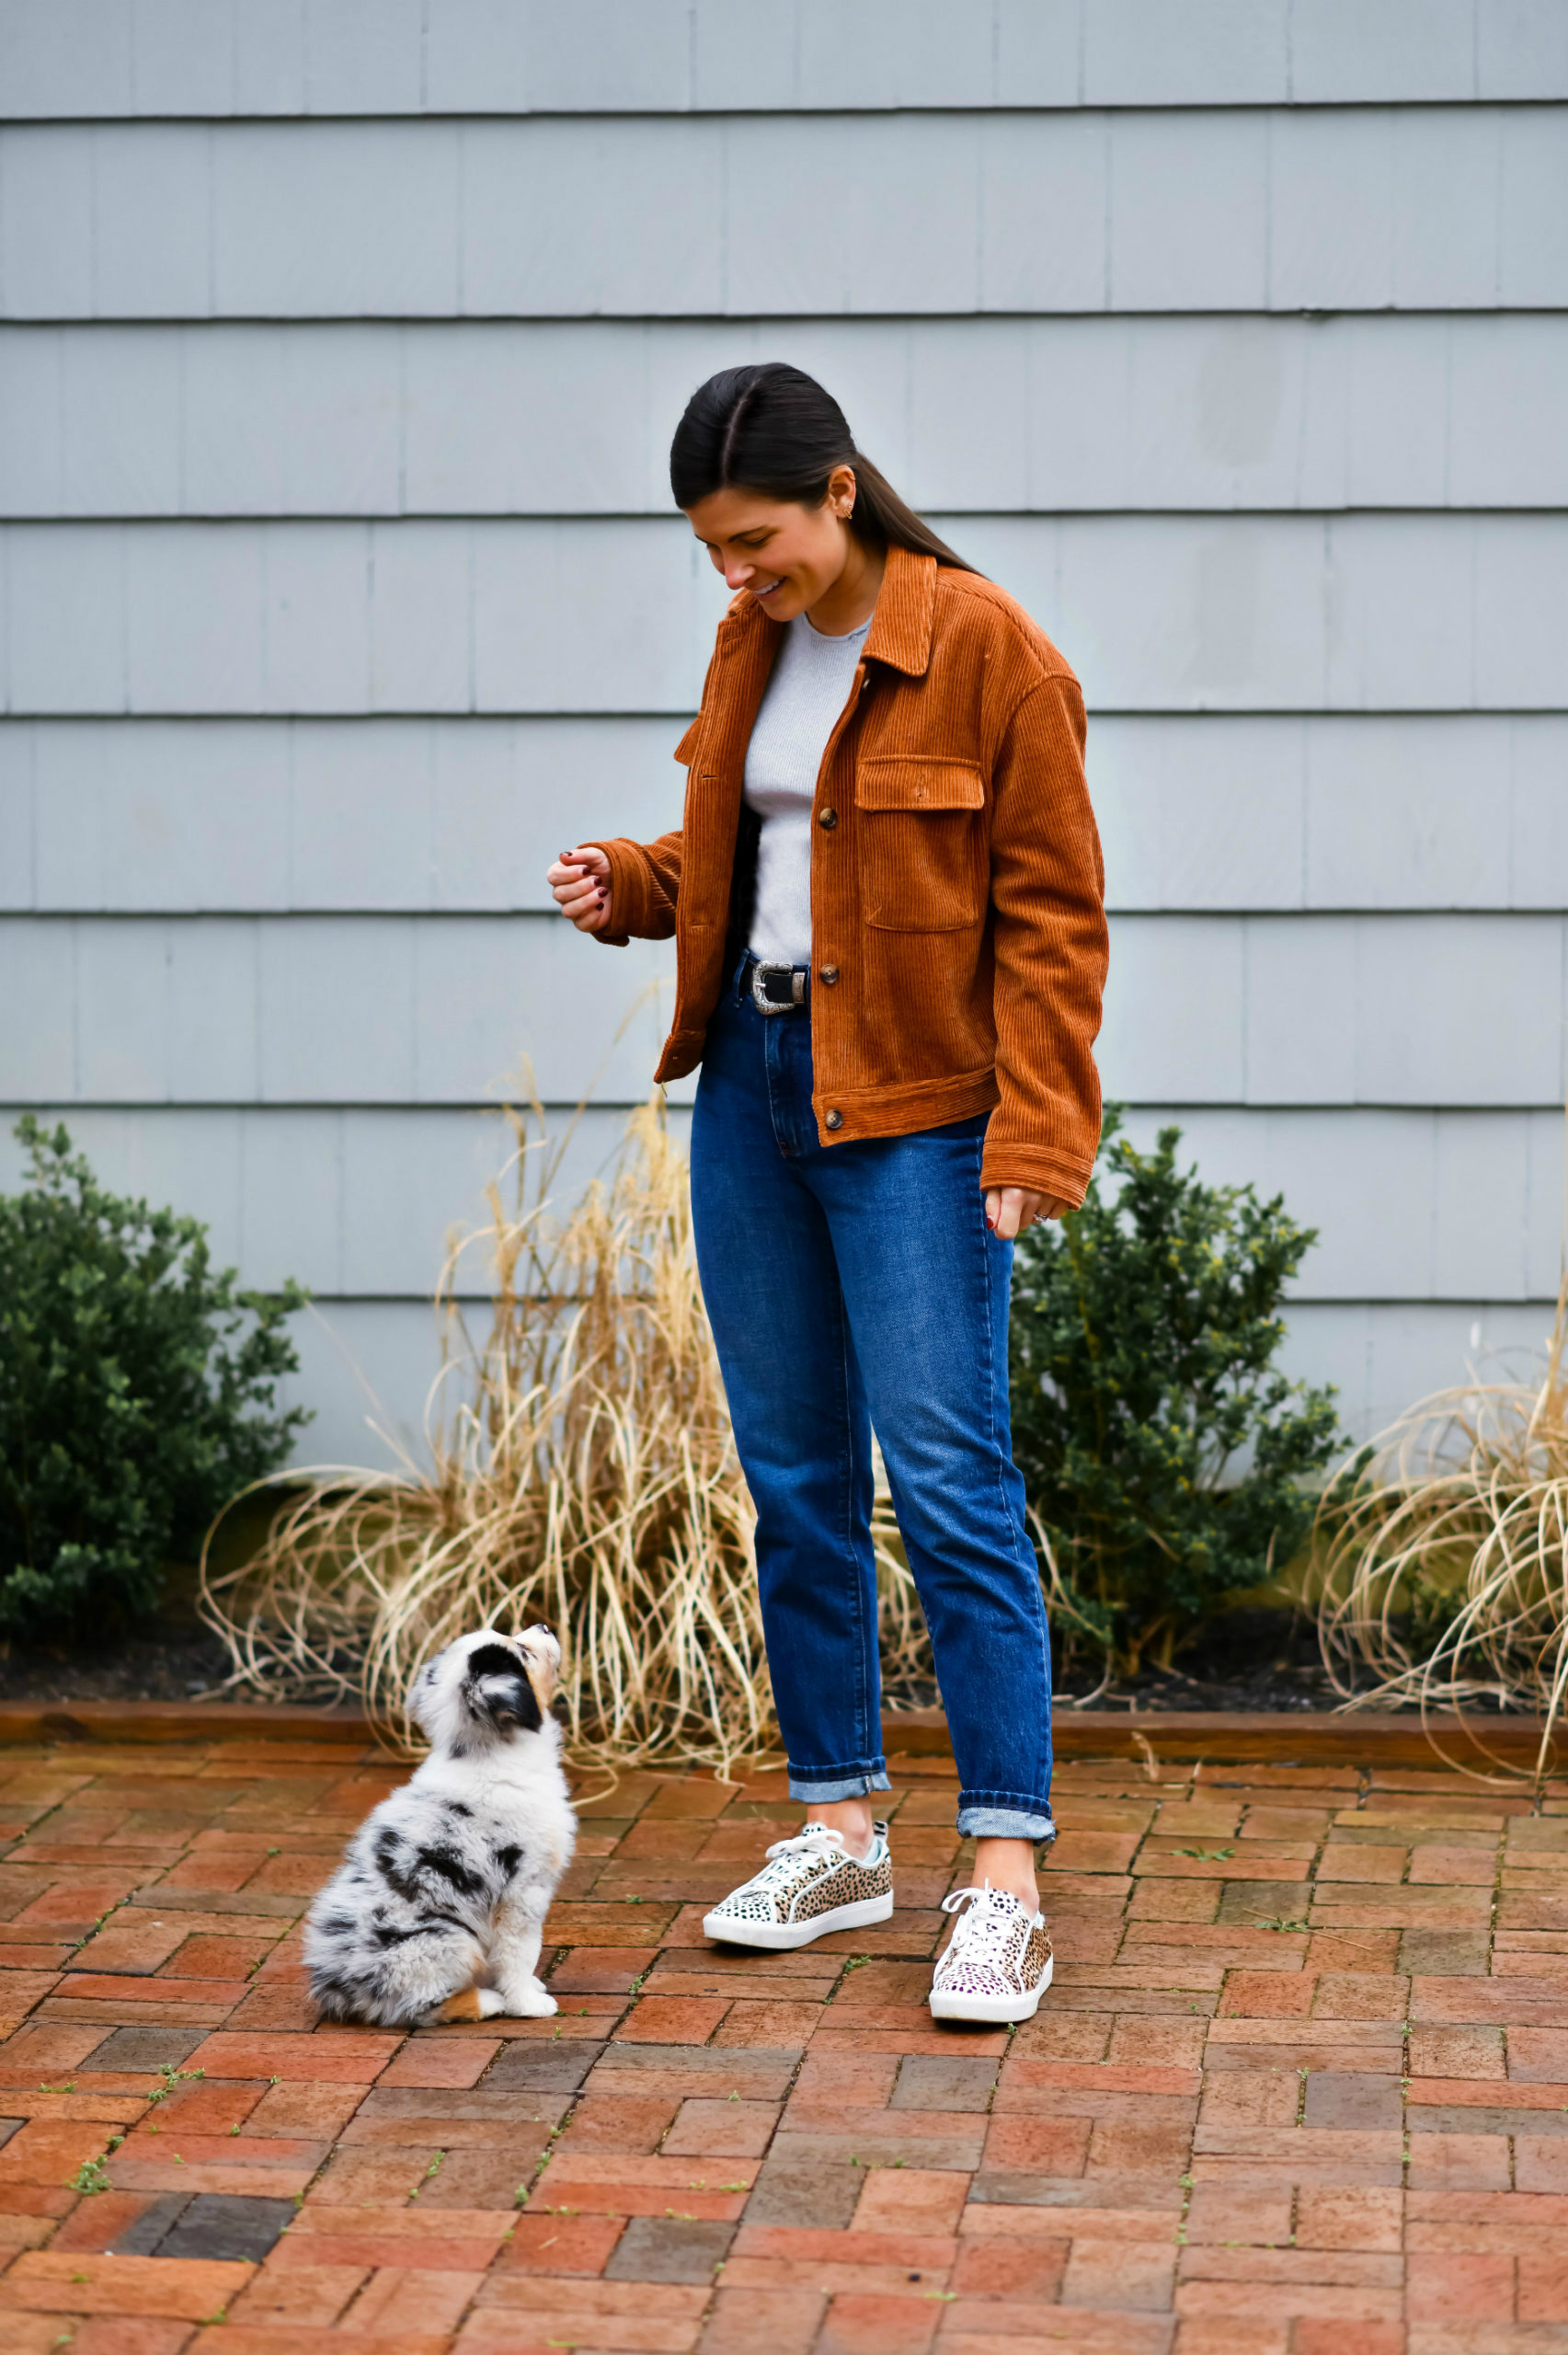 Mott & Bow The Mom "Henry" Jean, Mom Jean Outfit, UpWest Corduroy Trucker Jacket, Ann Taylor Natalia Spotted Sneakers, Tilden of To Be Bright 